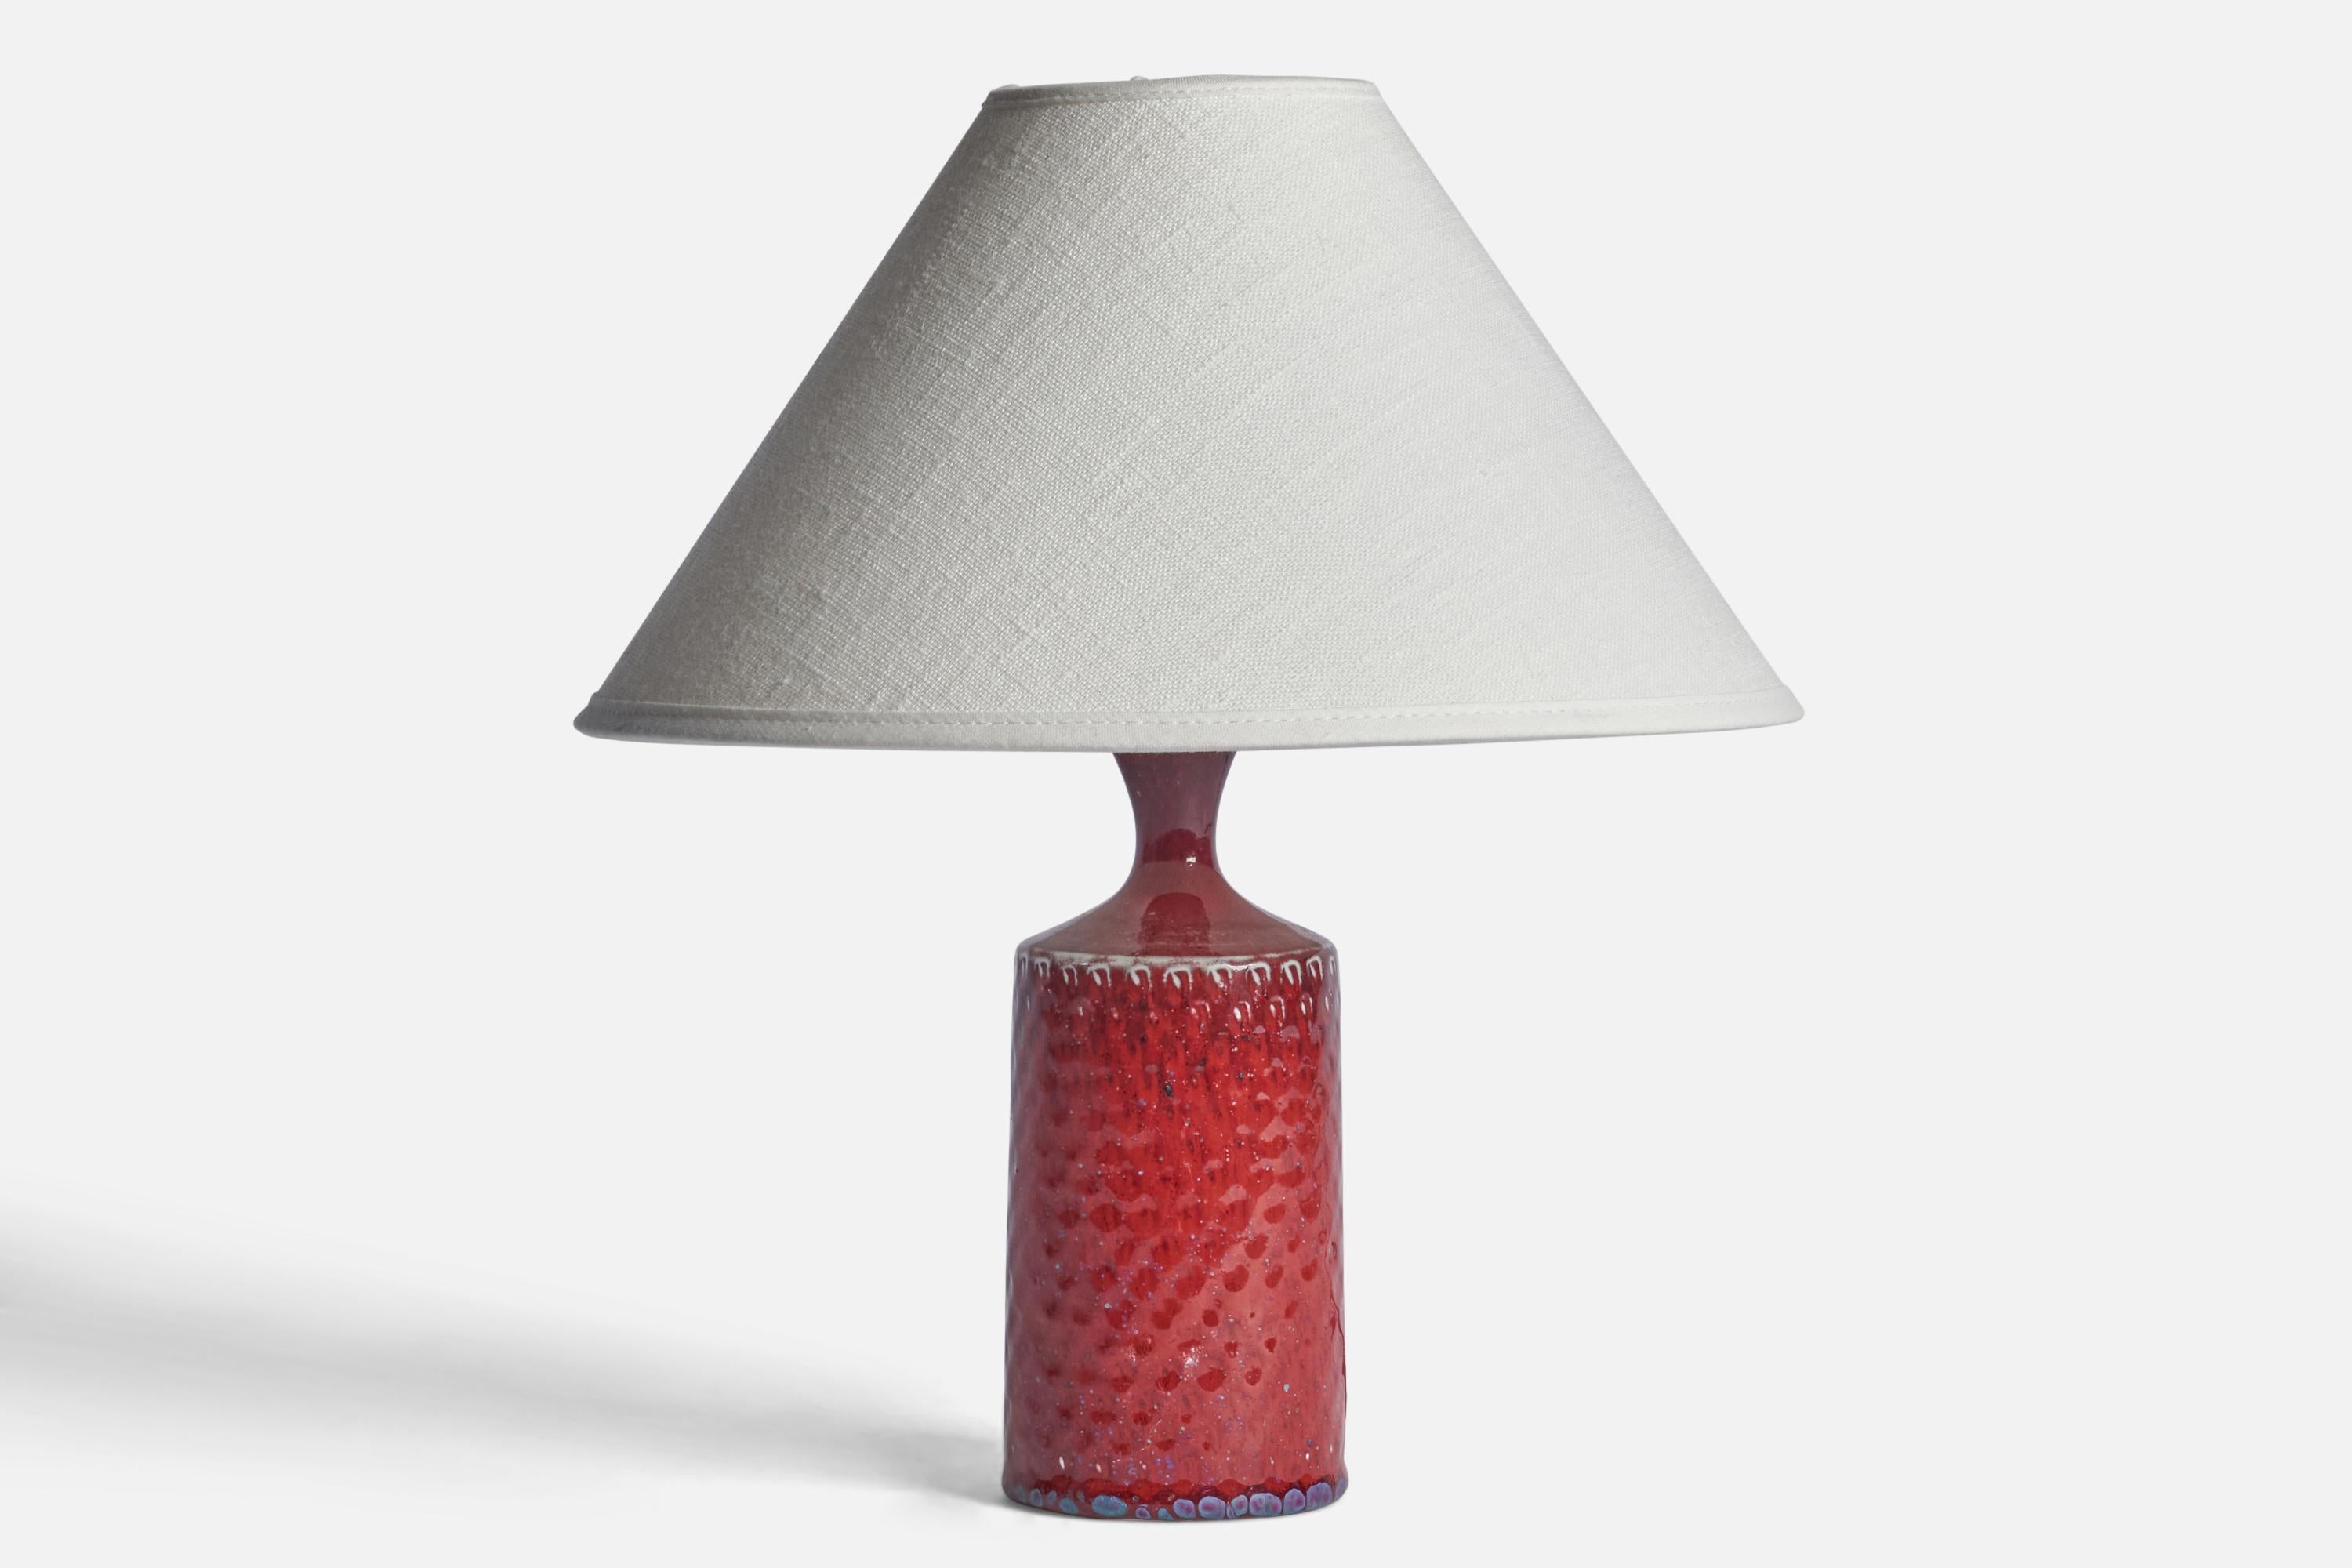 A red-glazed incised stoneware table lamp designed by Stig Lindberg and produced by Gustavsberg, Sweden, c. 1950s.

Dimensions of Lamp (inches): 8.5” H x 2.75” Diameter
Dimensions of Shade (inches): 2.5” Top Diameter x 10” Bottom Diameter x